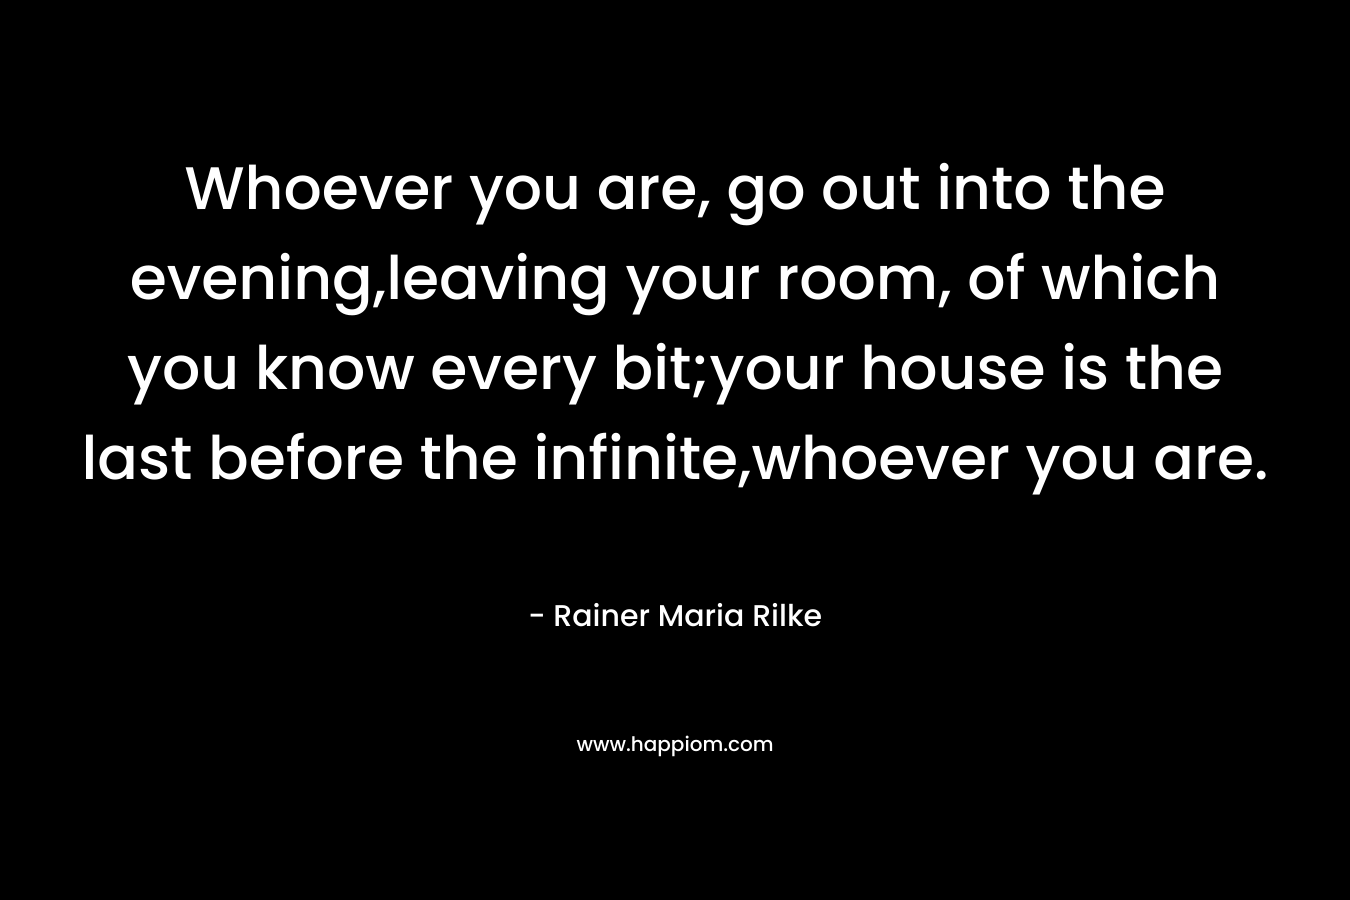 Whoever you are, go out into the evening,leaving your room, of which you know every bit;your house is the last before the infinite,whoever you are.